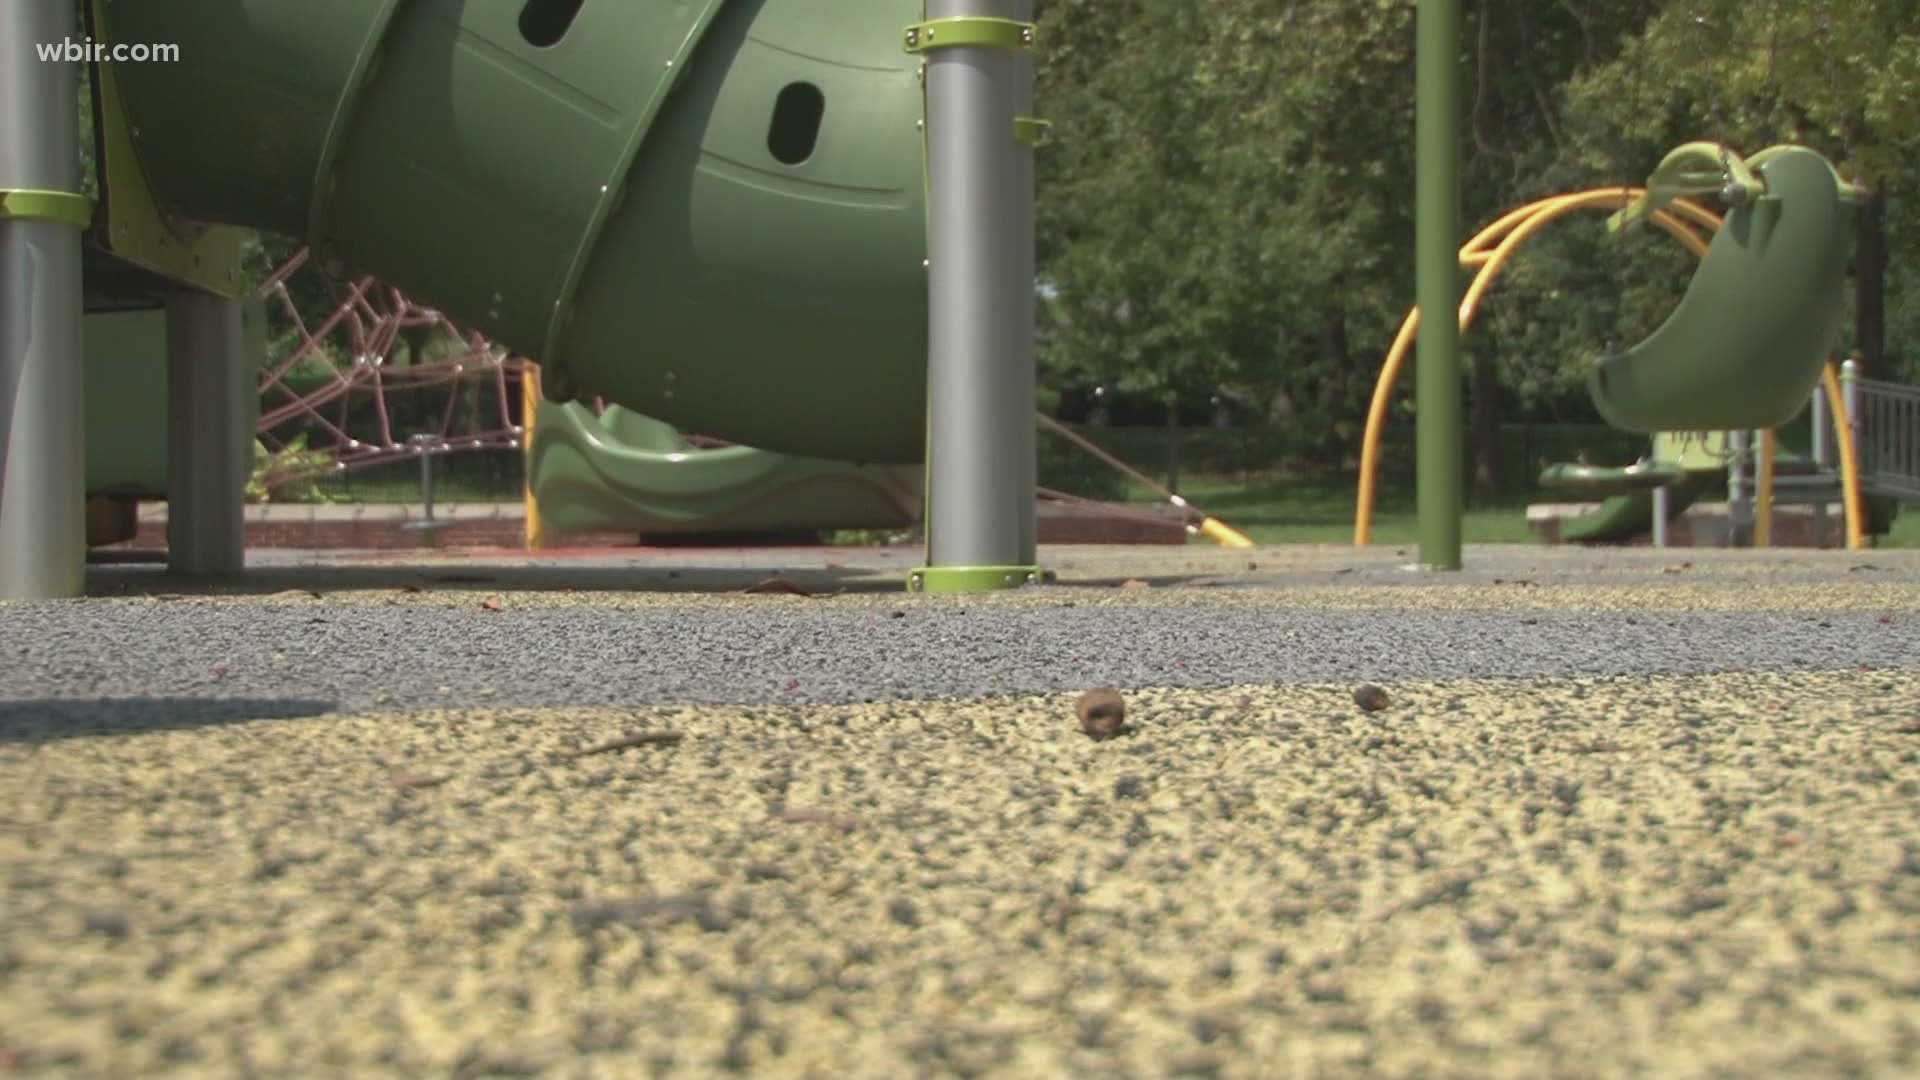 Knoxville playgrounds are finally back open after being roped off for months due to the coronavirus.